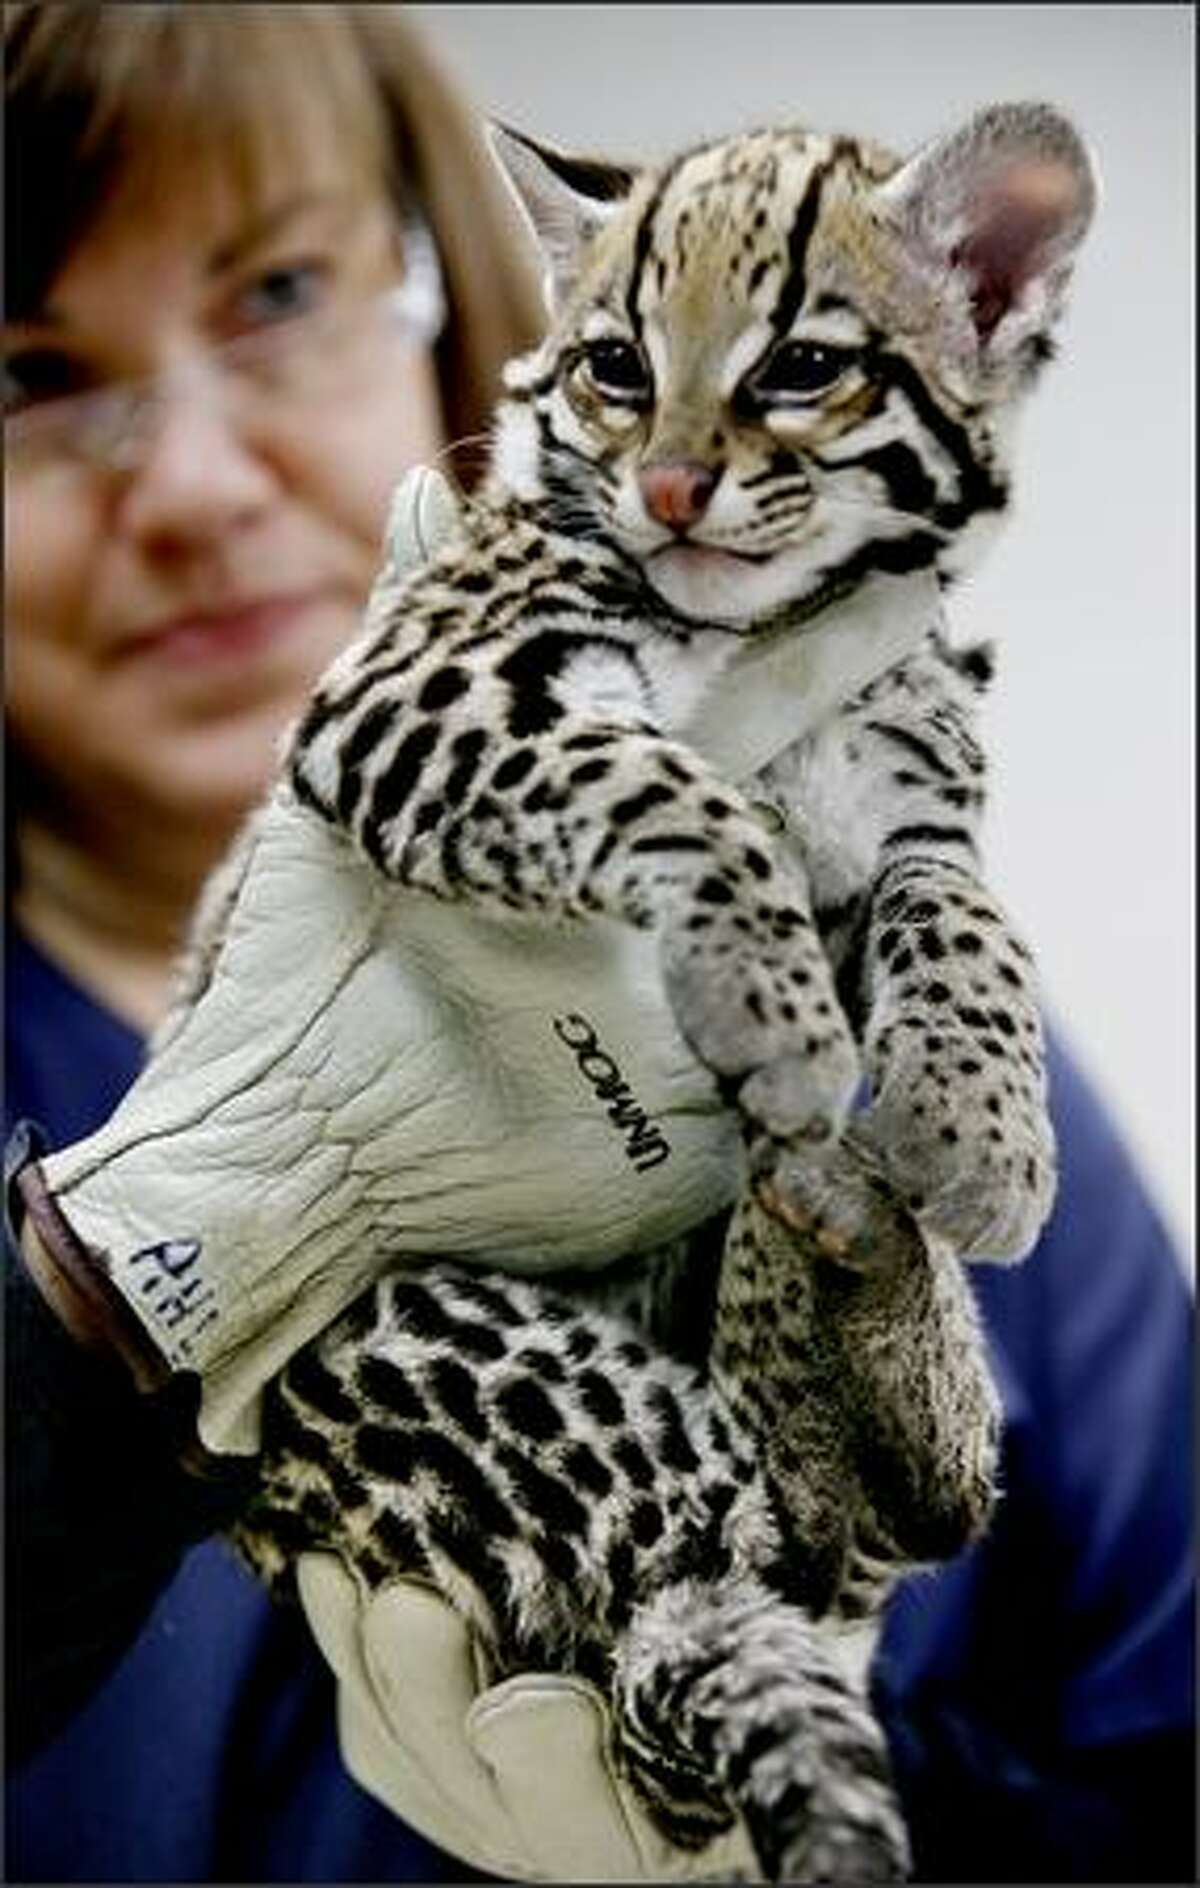 Corisandra, an 18-week-old Ocelot, wakes up from anesthesia in the hands of Linda Moneymaker, a veterinary technician at the Woodland Park Zoo in Seattle on Wednesday. Corisandra and her sibling Novia received physical examinations in the zoo's clinic. They were born at the zoo and will be introduced to the exhibition area in the next two weeks.